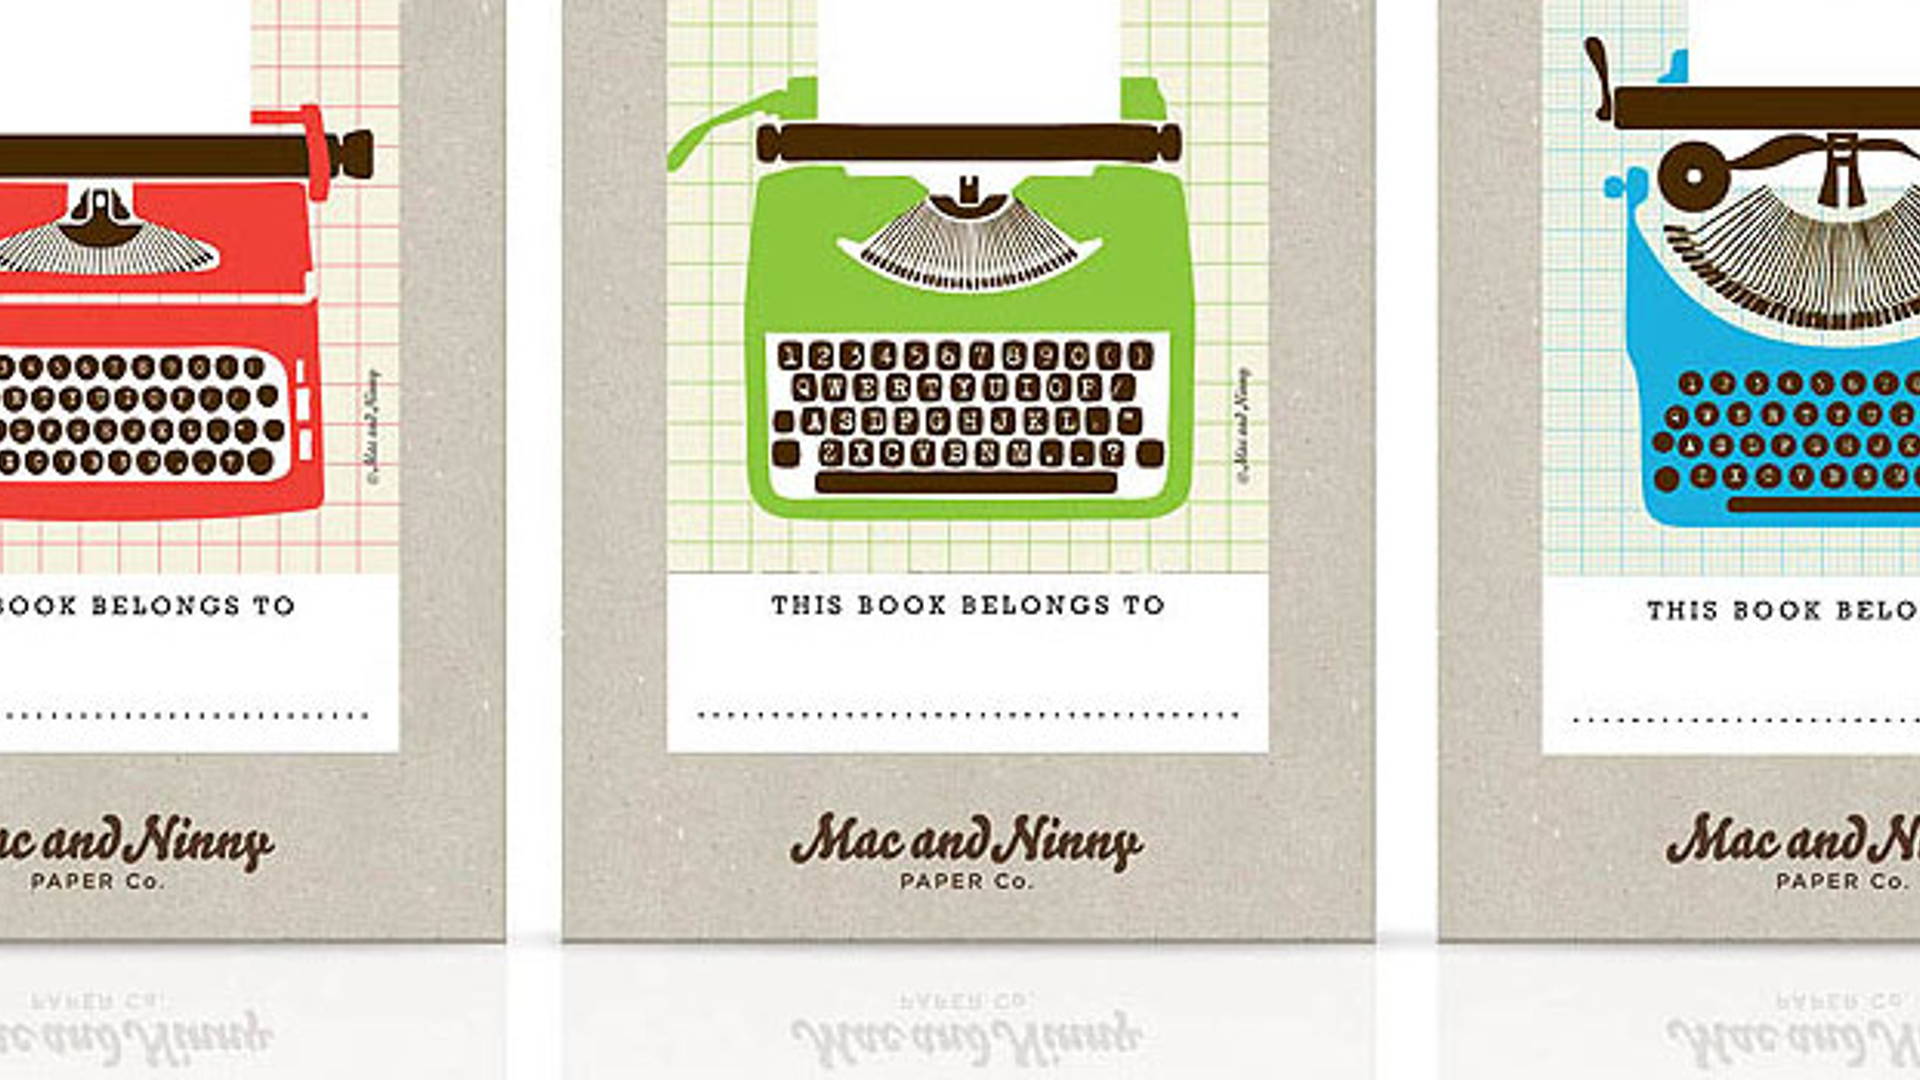 Featured image for Mac and Ninny Paper Co